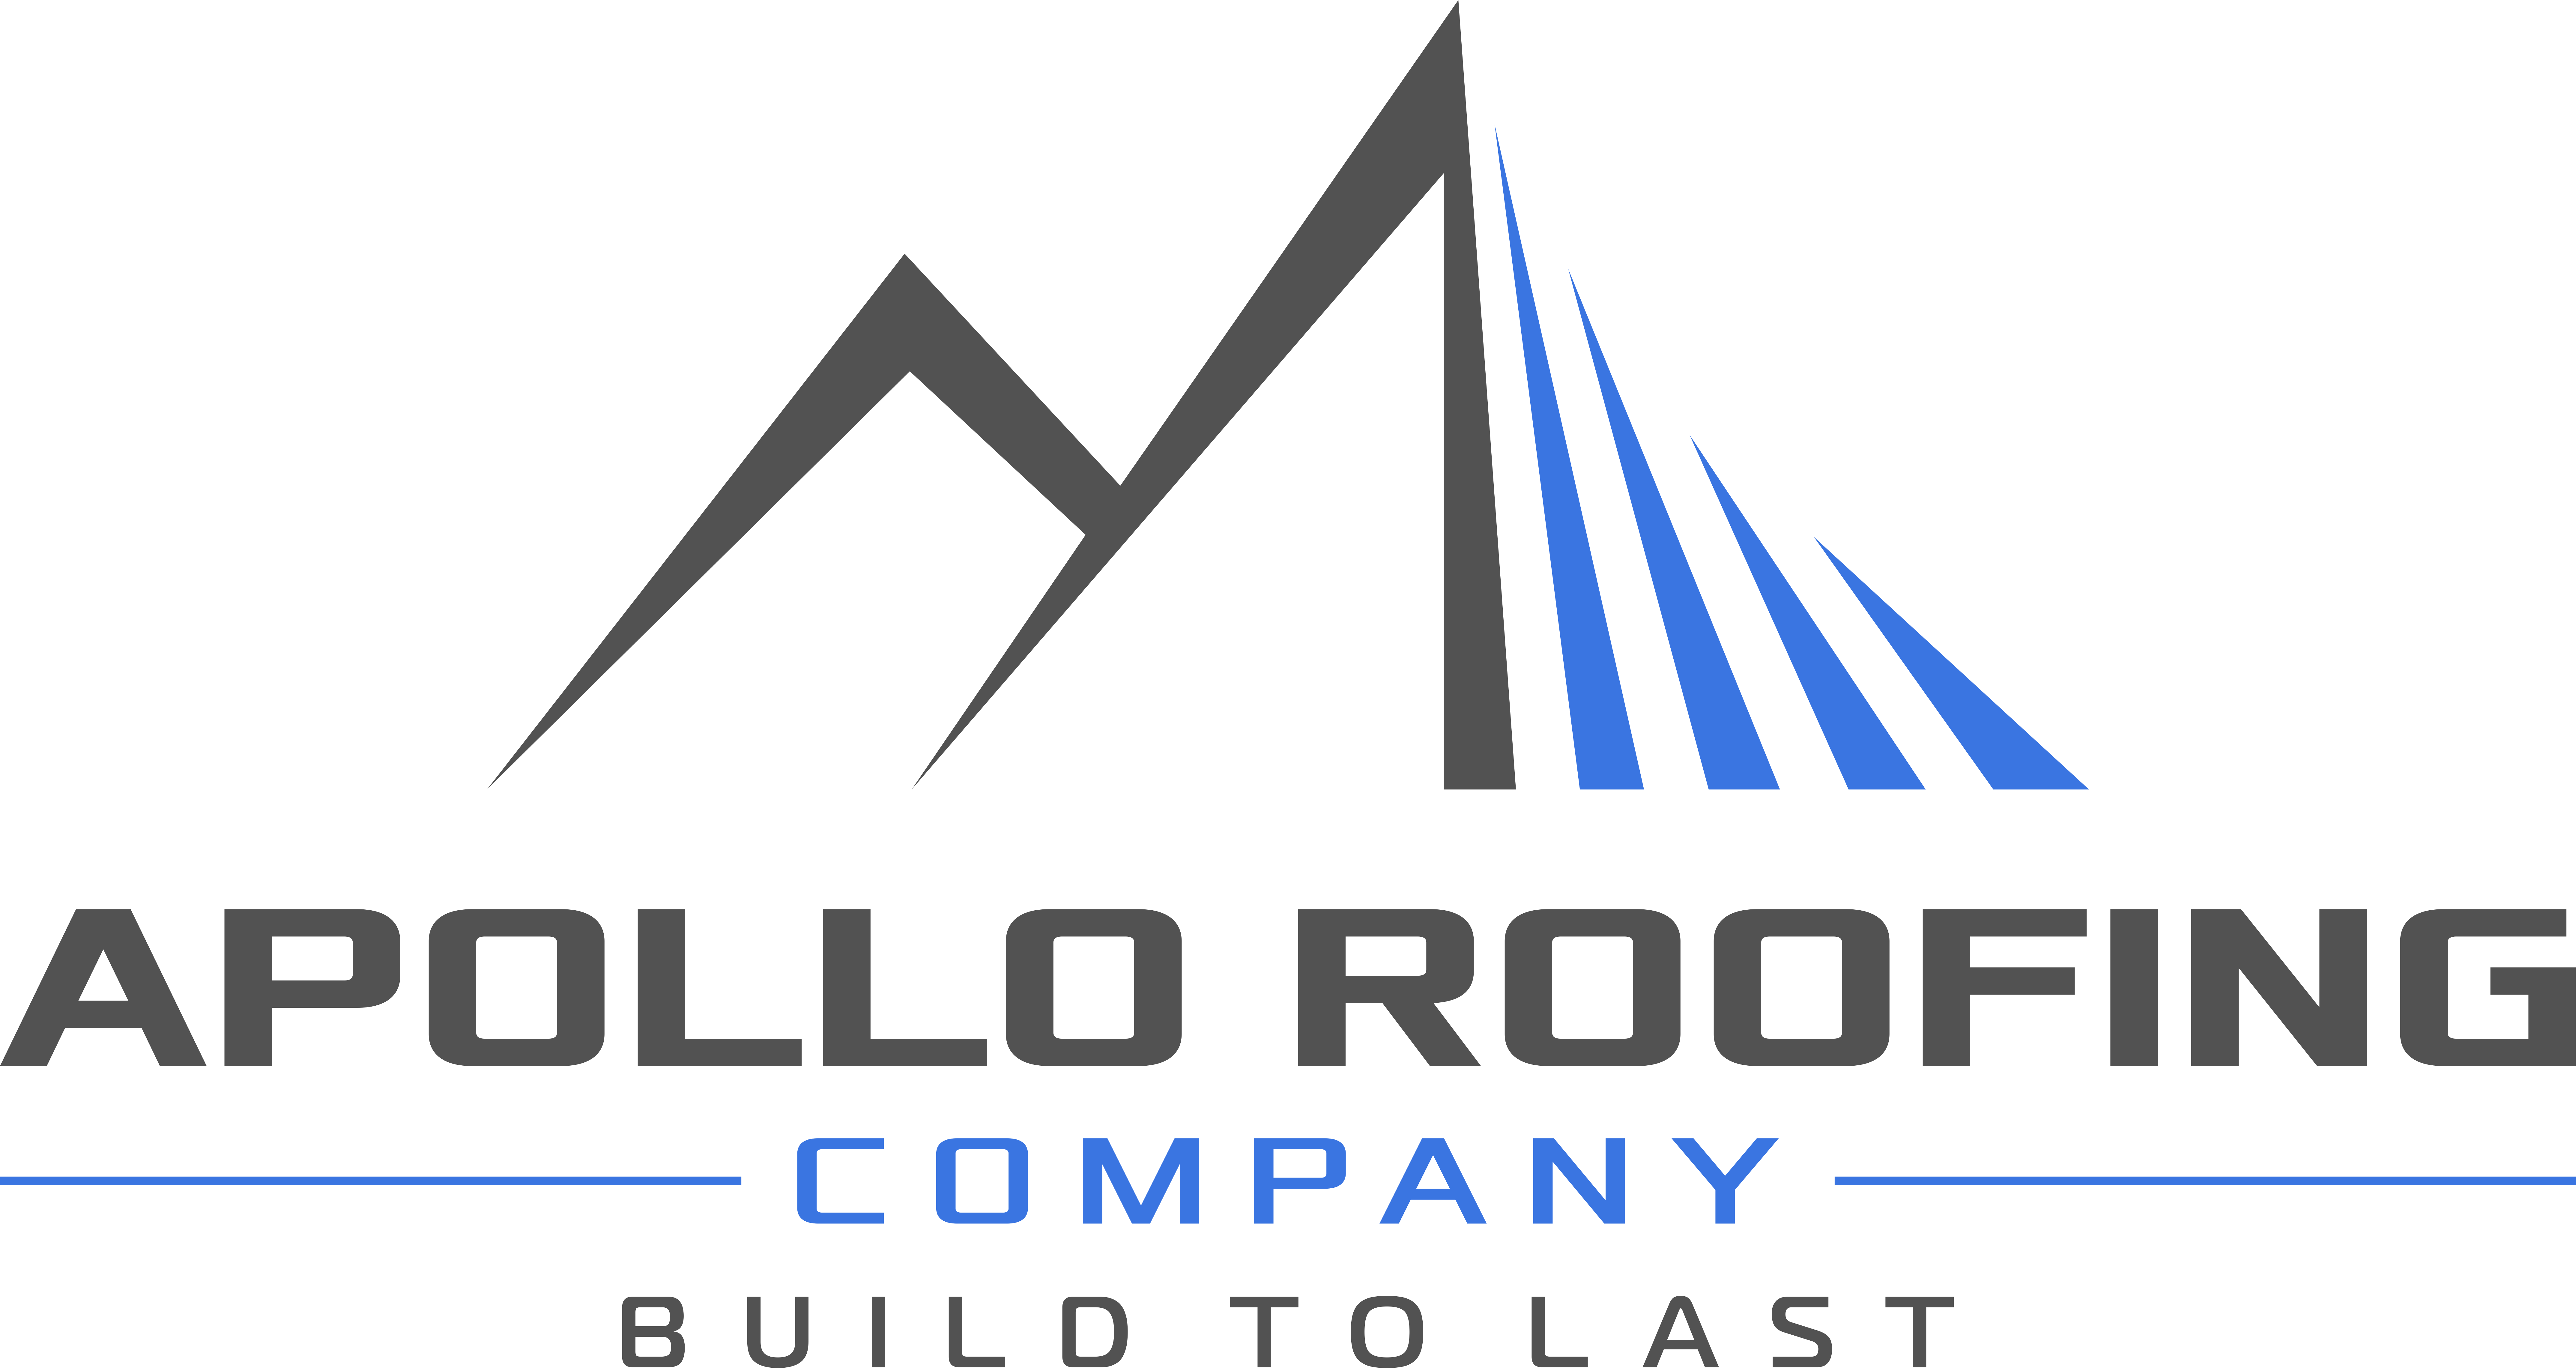 Apollo Roofing Company Is Walnut Creek, CA’s Best Roofing Company; Here Is Why